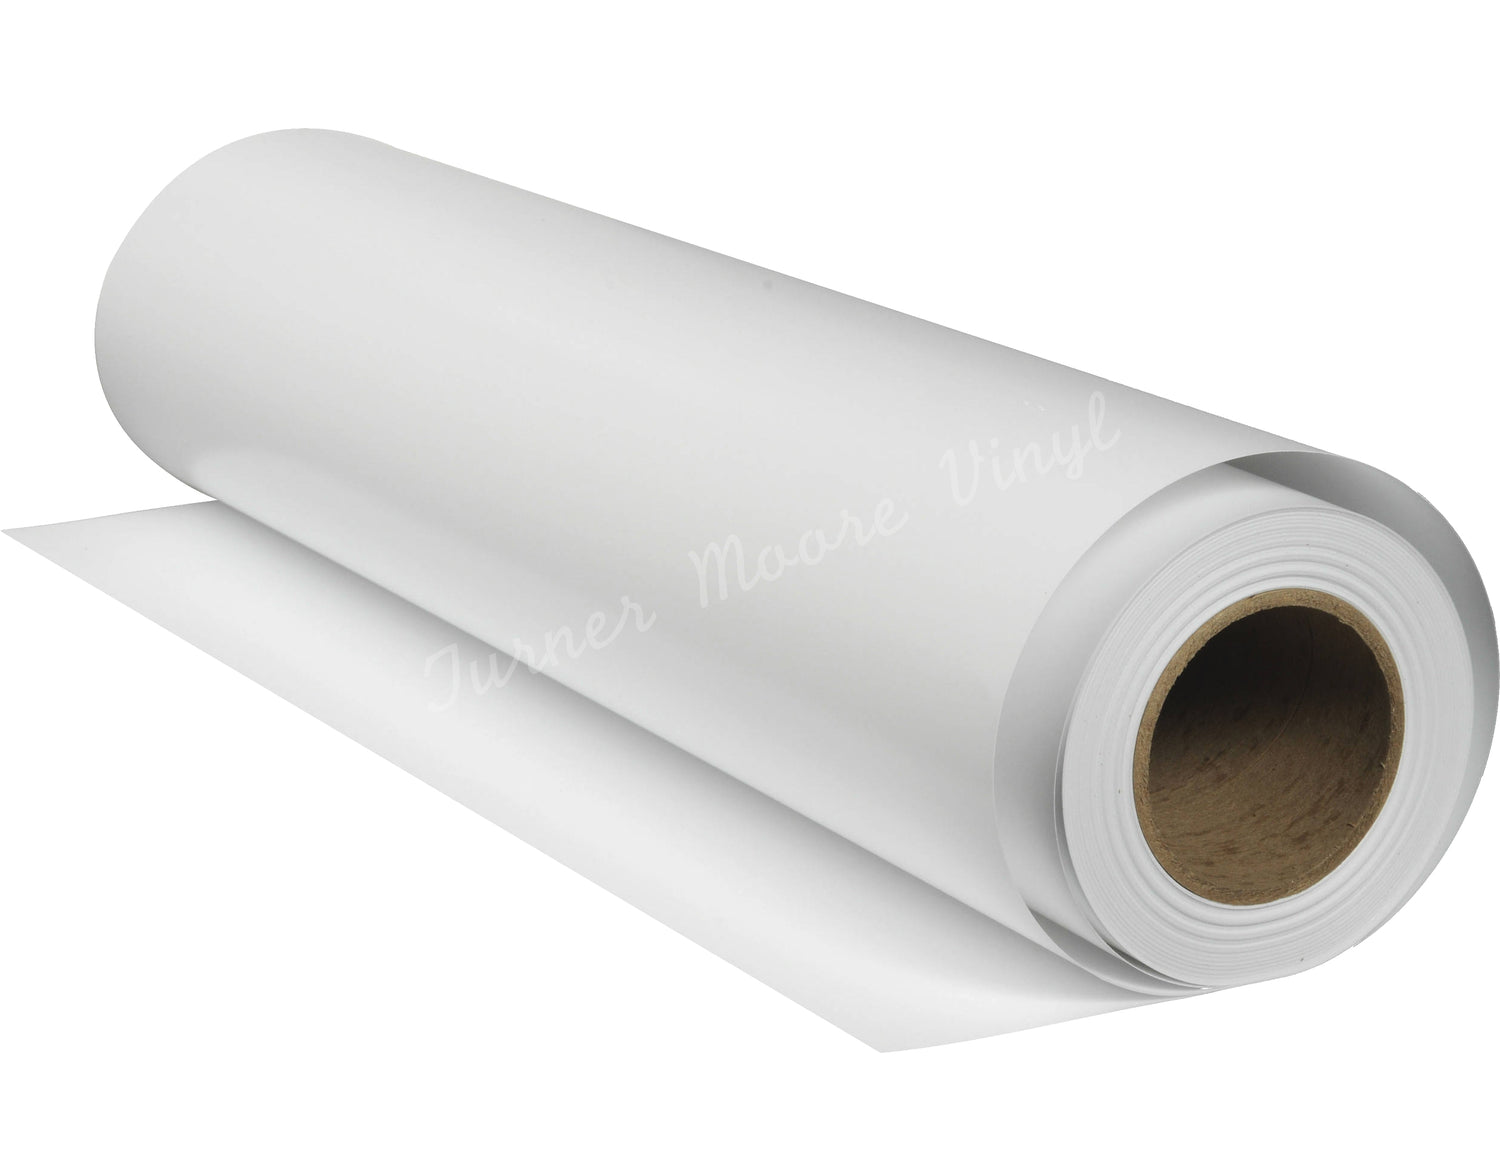 Matte White Adhesive Vinyl Roll 12" by 15 FT by Turner Moore Vinyl